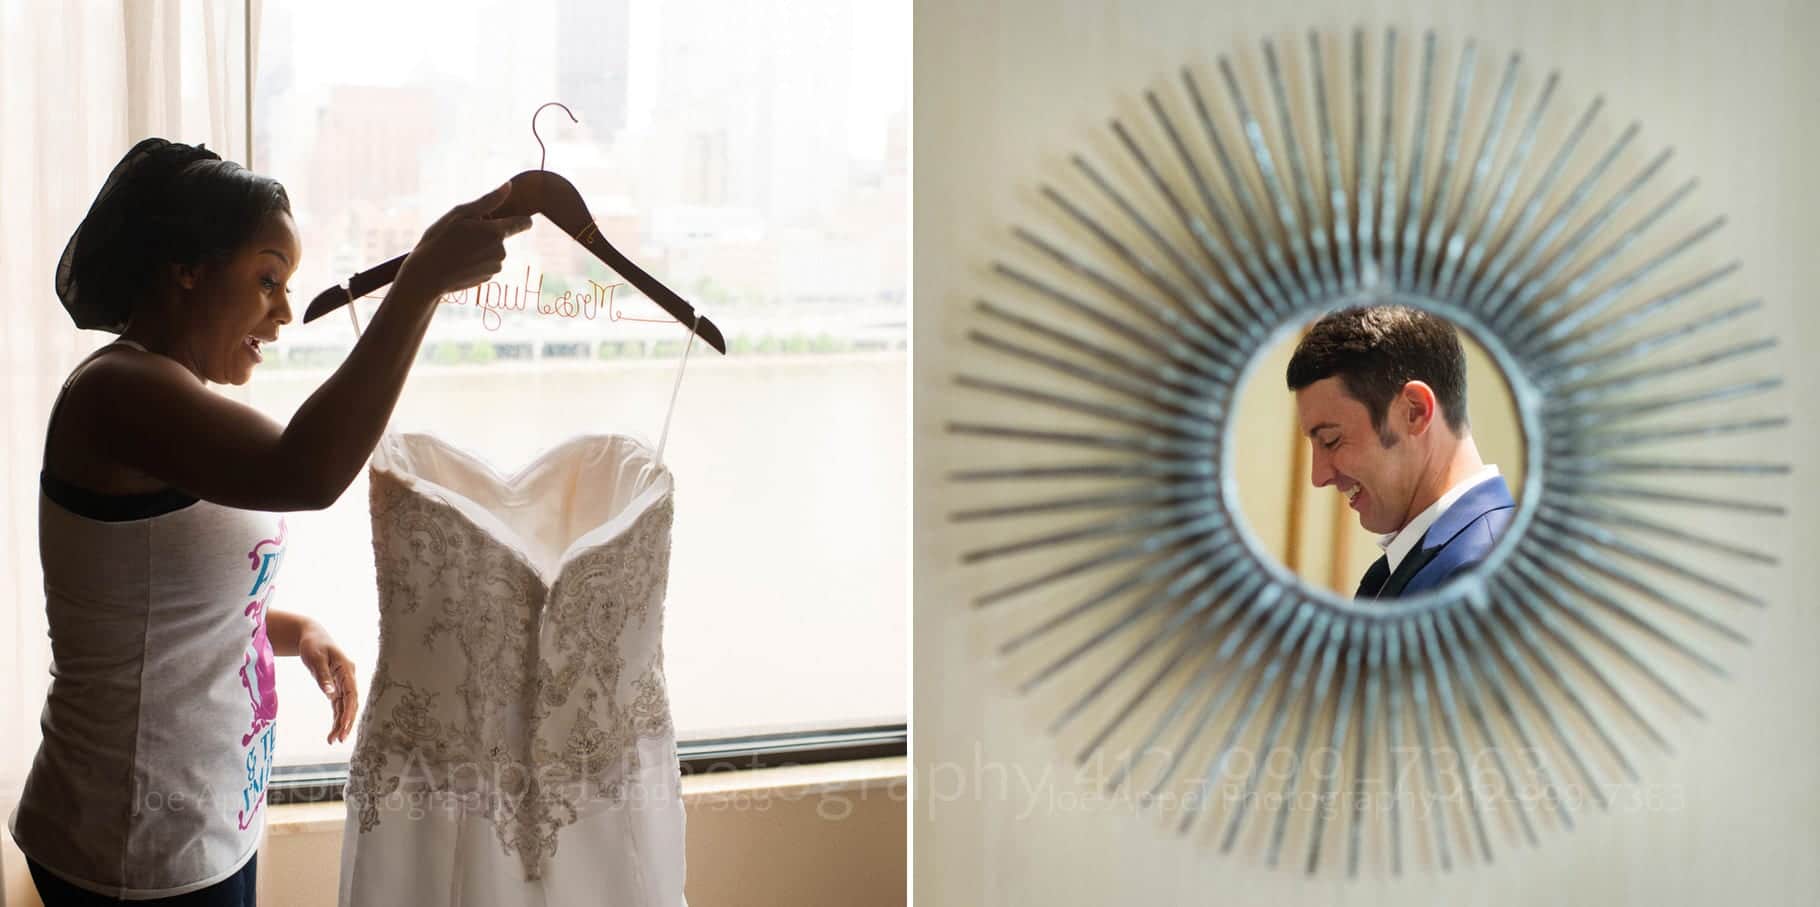 A bride smiles as she holds her wedding dress by a personalized hanger in front of a hotel room wedding. A groom is reflected in a mirror shaped like a sunburst.